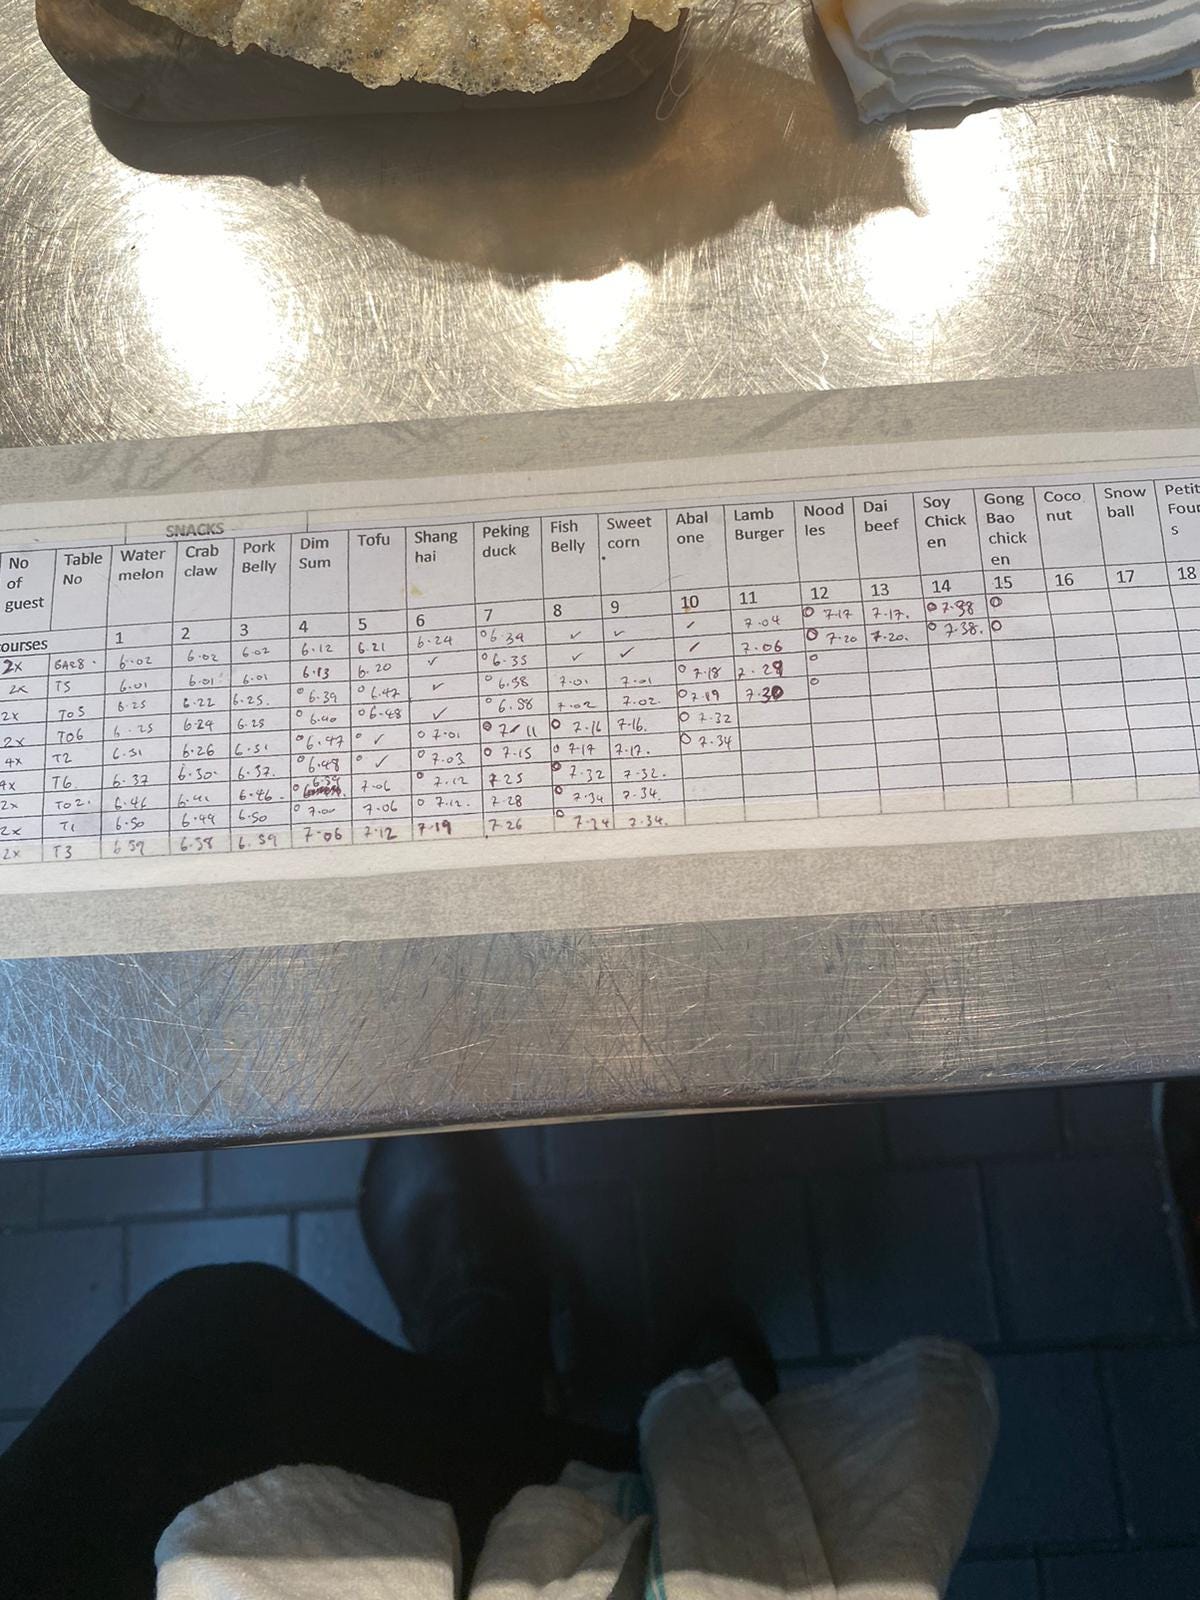 An overhead image of a paper taped to the stainless steel surface of a restaurant pass showing a table with the names of dishes and the timings for when these dishes should be served to diners